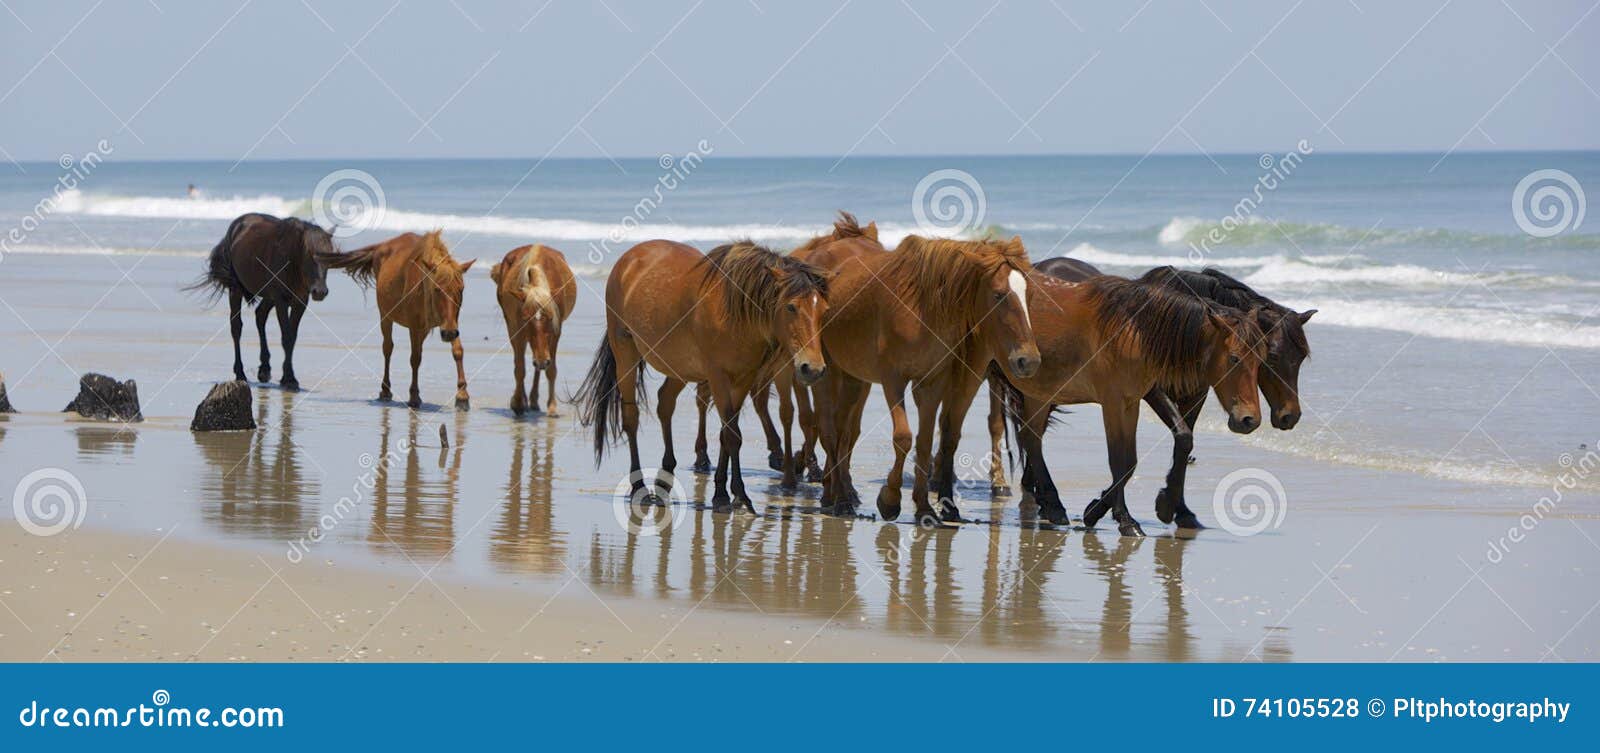 Drifters. Significant herd of wild, brown, mustang horses walking the beaches of the Outer Banks, NC. Turquoise waters and pale blue sky beyond them. Reflective, wet sand at their feet and foreground.